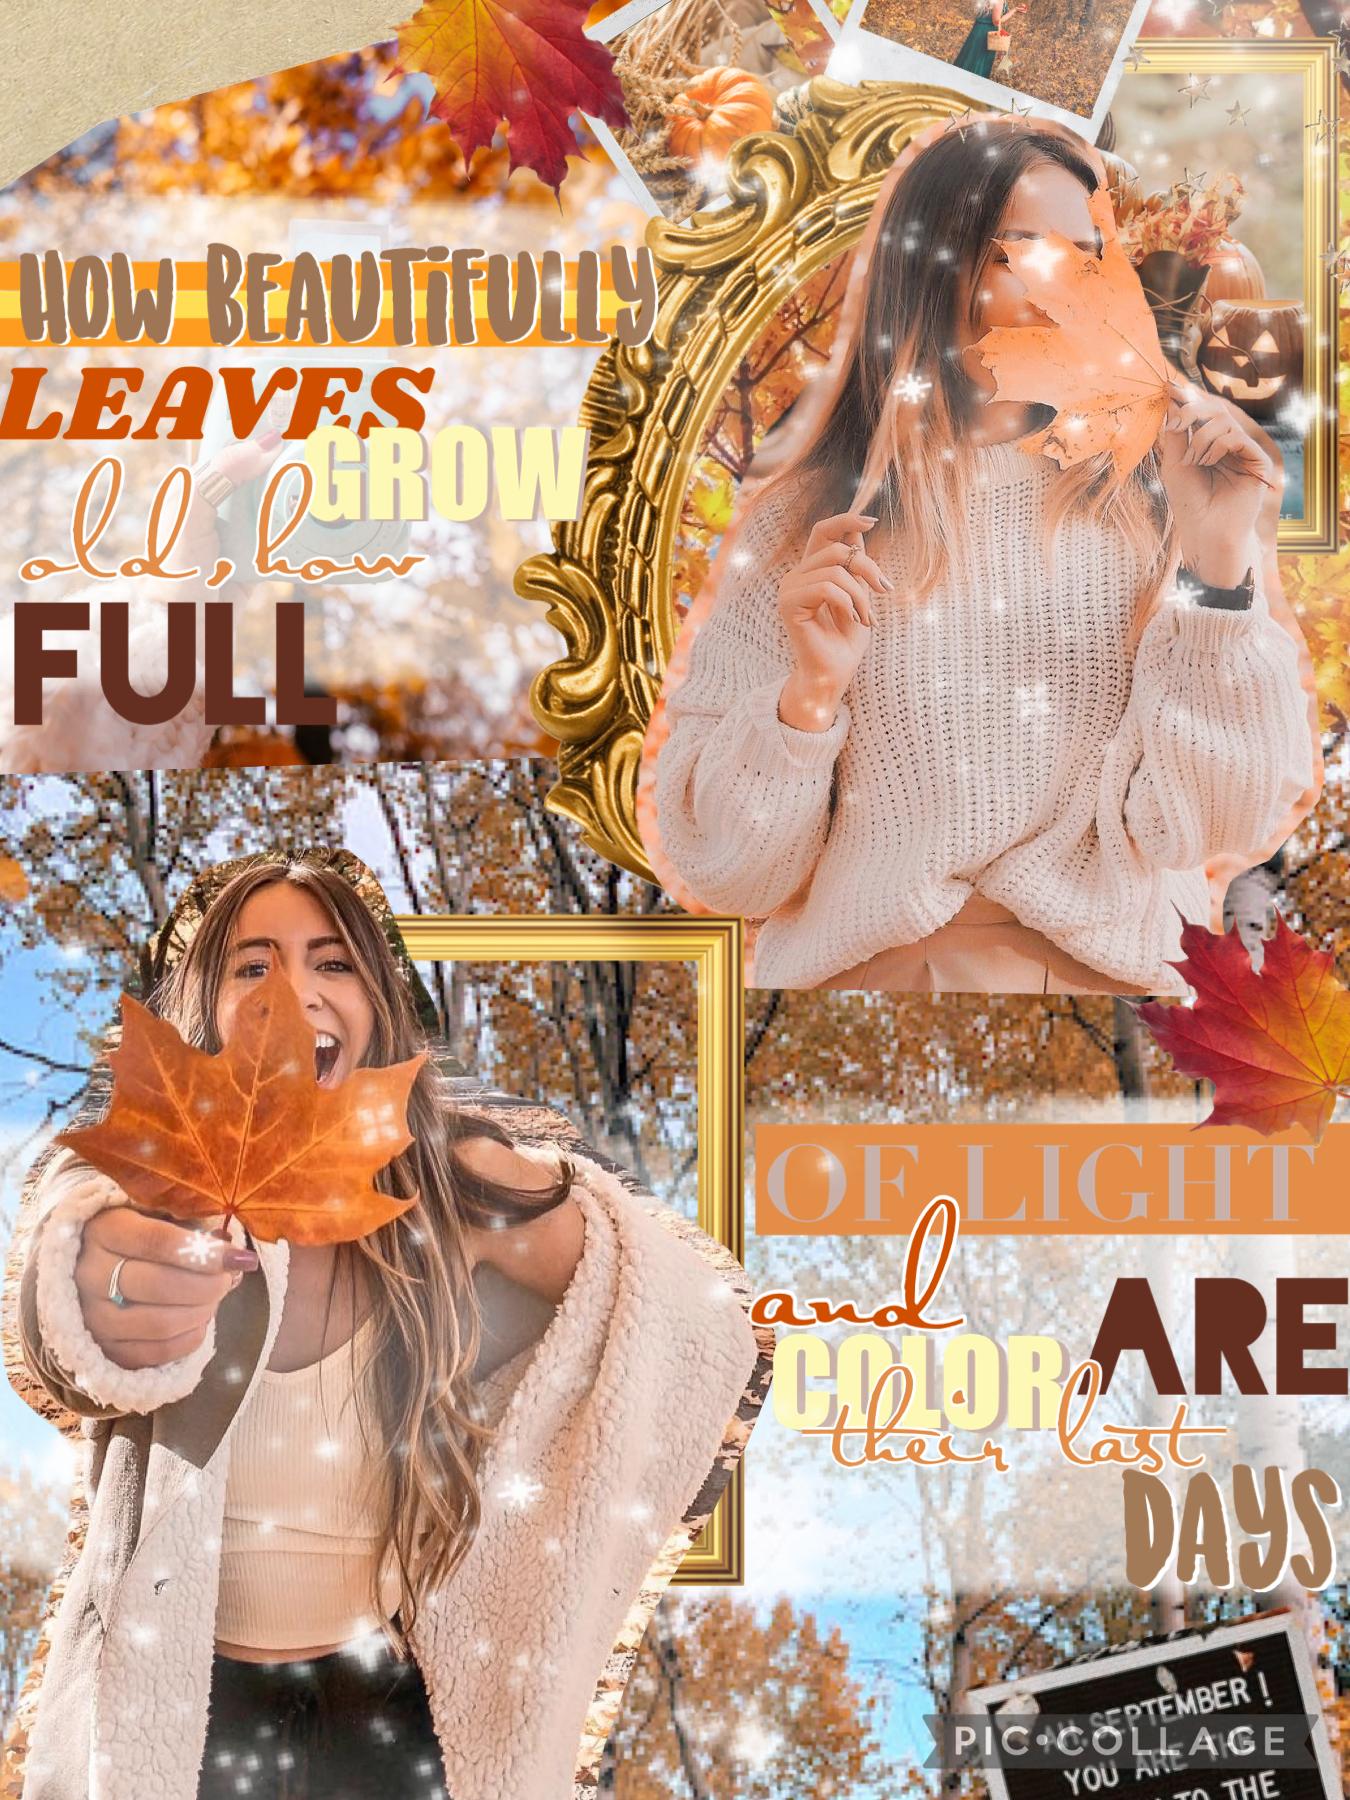 🍁Tap🍁
This was an entry to Just roses contest aka Laura. I thought I would post this because it took several days, because I would work on it before school cause that was like the only time I was not busy haha. I'll probably make a preppy collage similar 